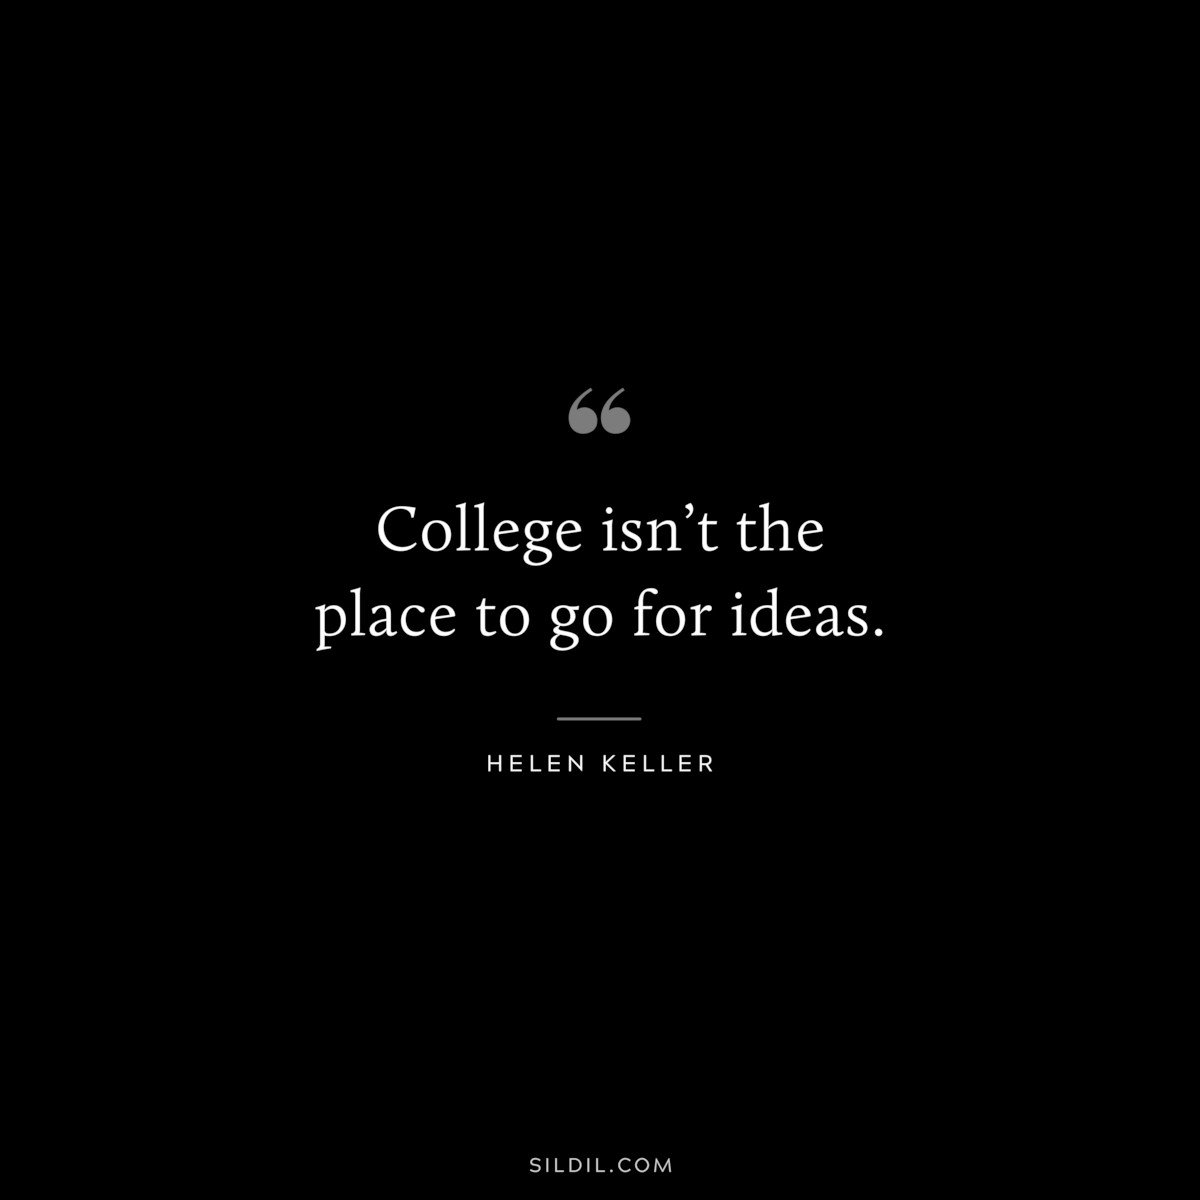 College isn’t the place to go for ideas. ― Helen Keller